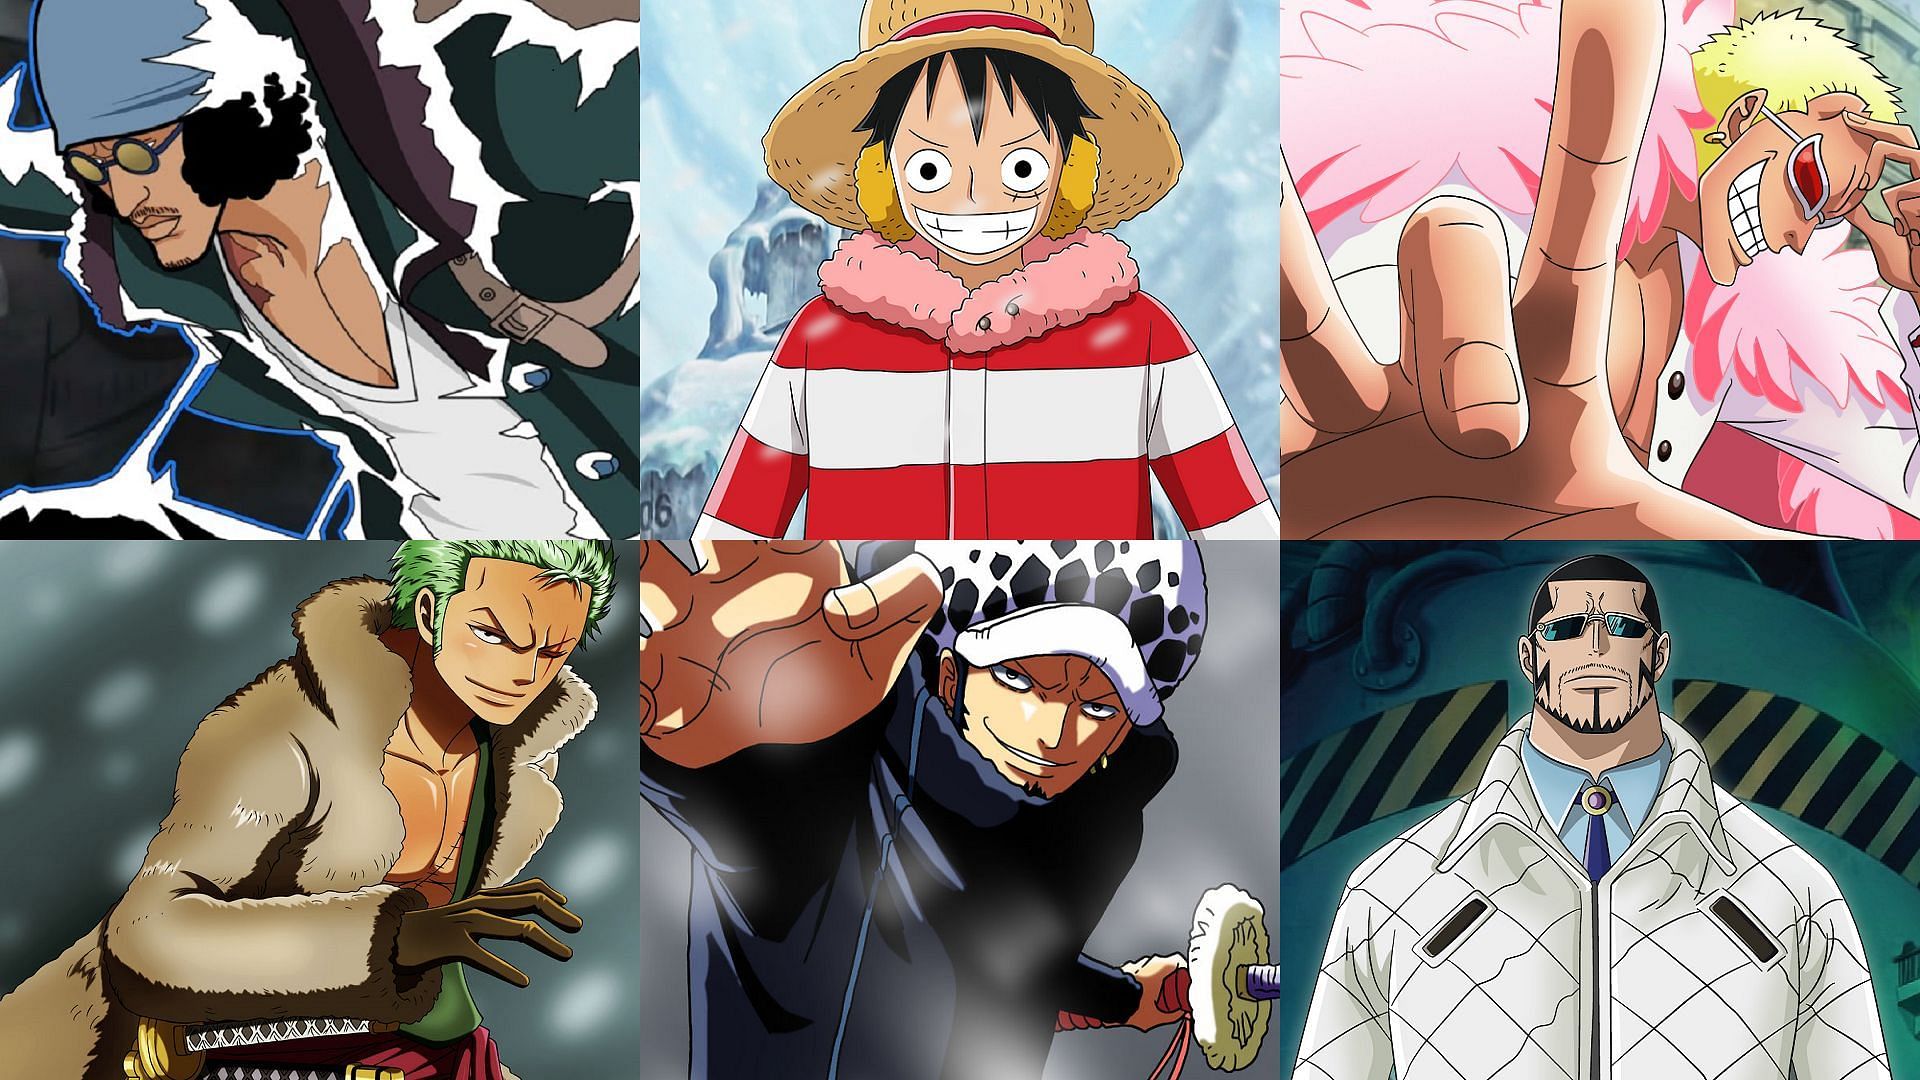 Aokiji, Luffy, Doflamingo, Zoro, Law, and Vergo were the six strongest characters featured in the Punk Hazard Arc (Image via Toei Animation, One Piece)